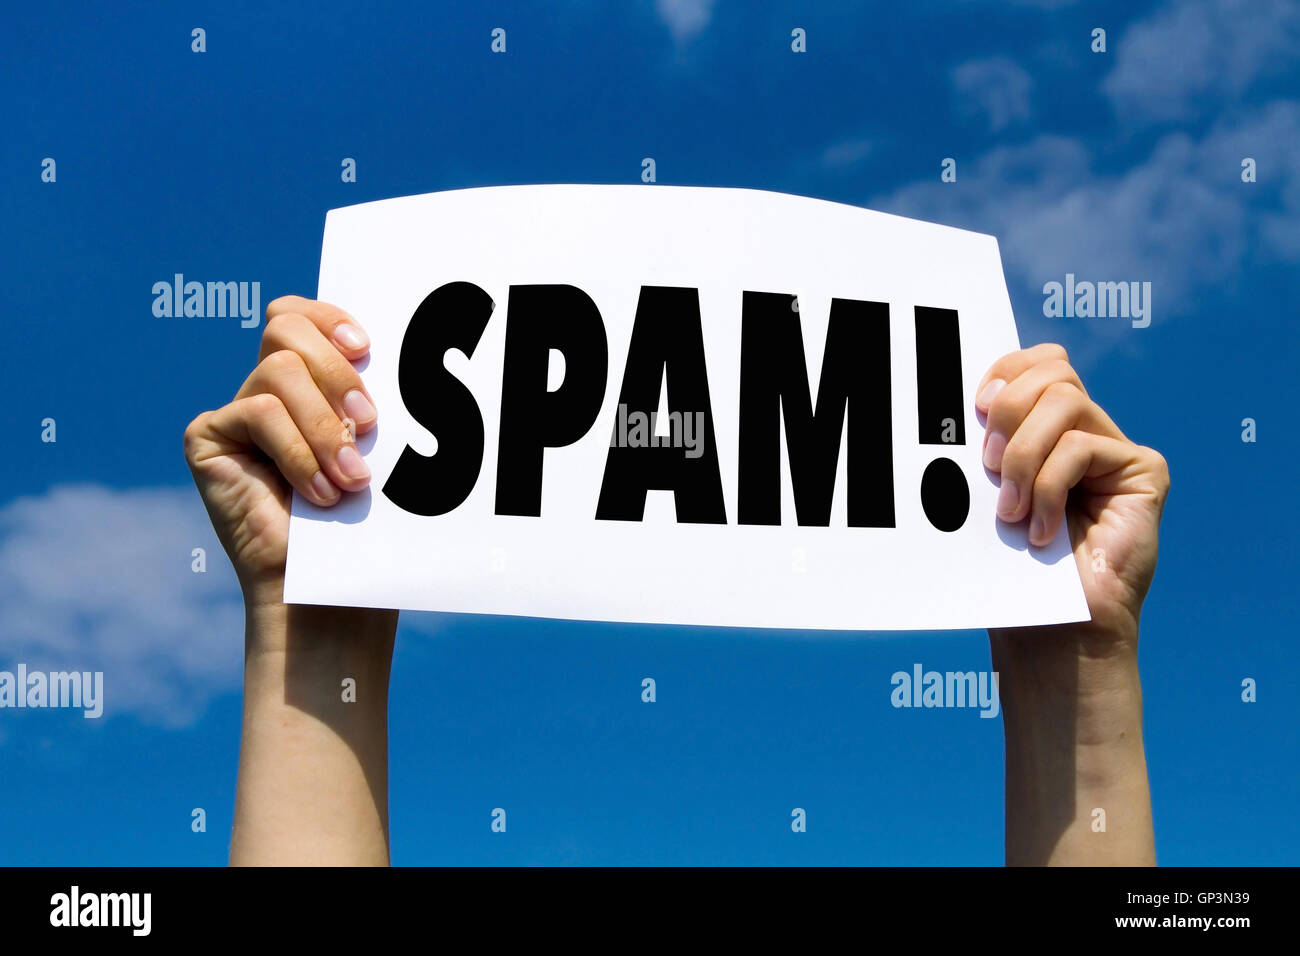 spam alert, hands holding paper sign Stock Photo